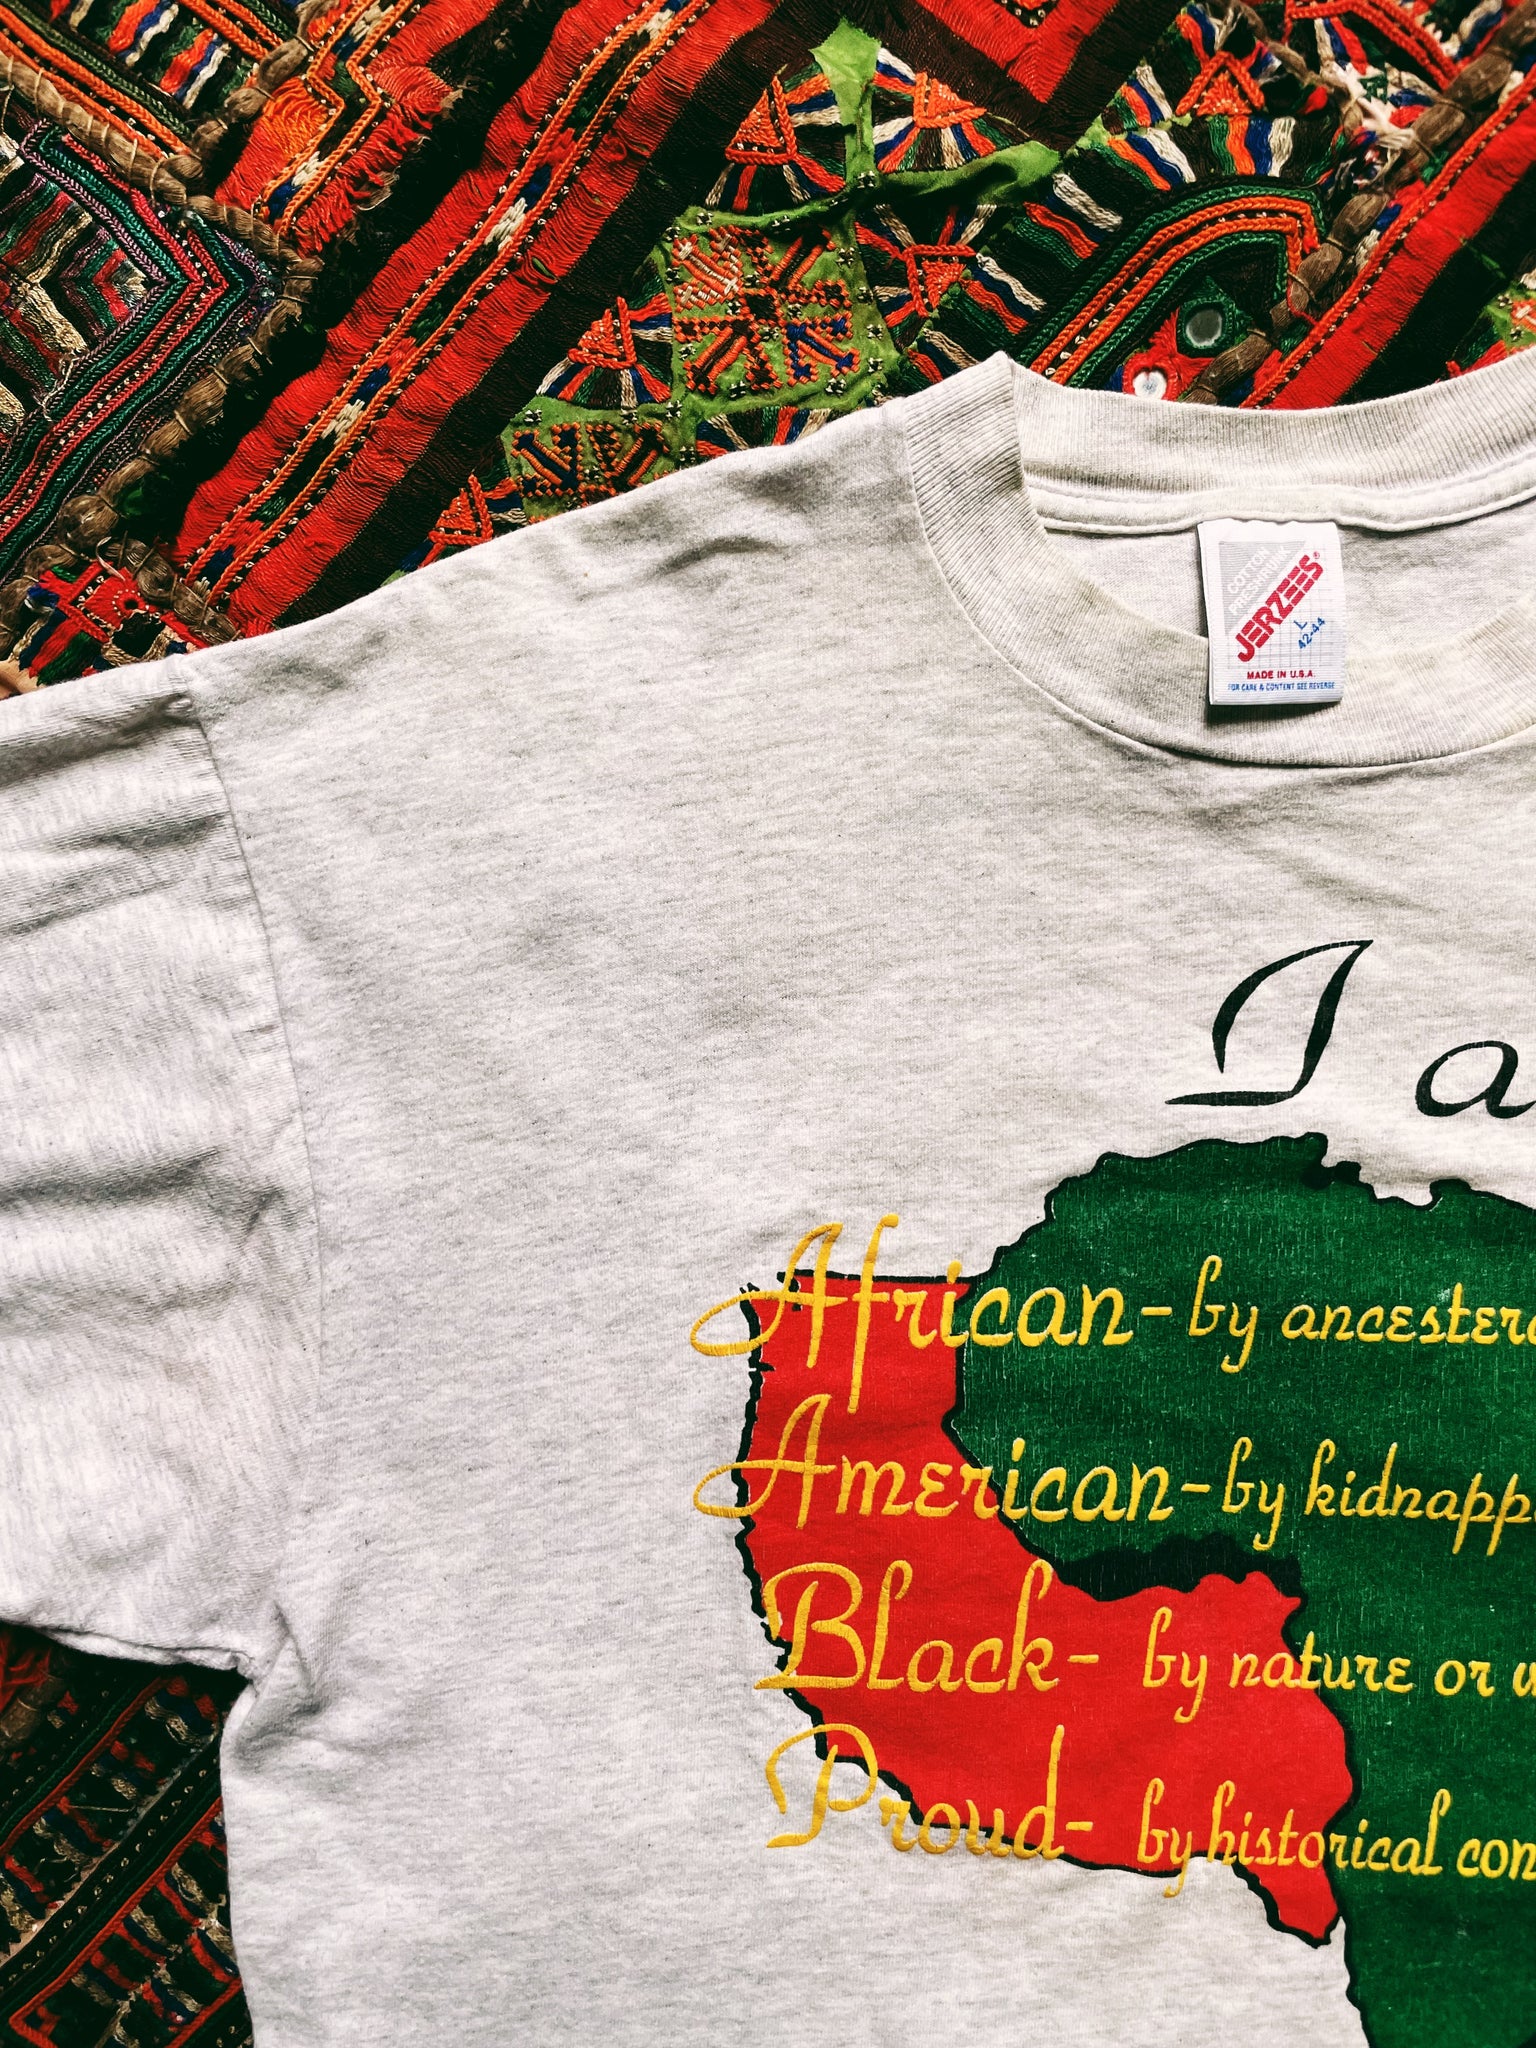 Vintage “I Am African American” T-Shirt (1990’s)